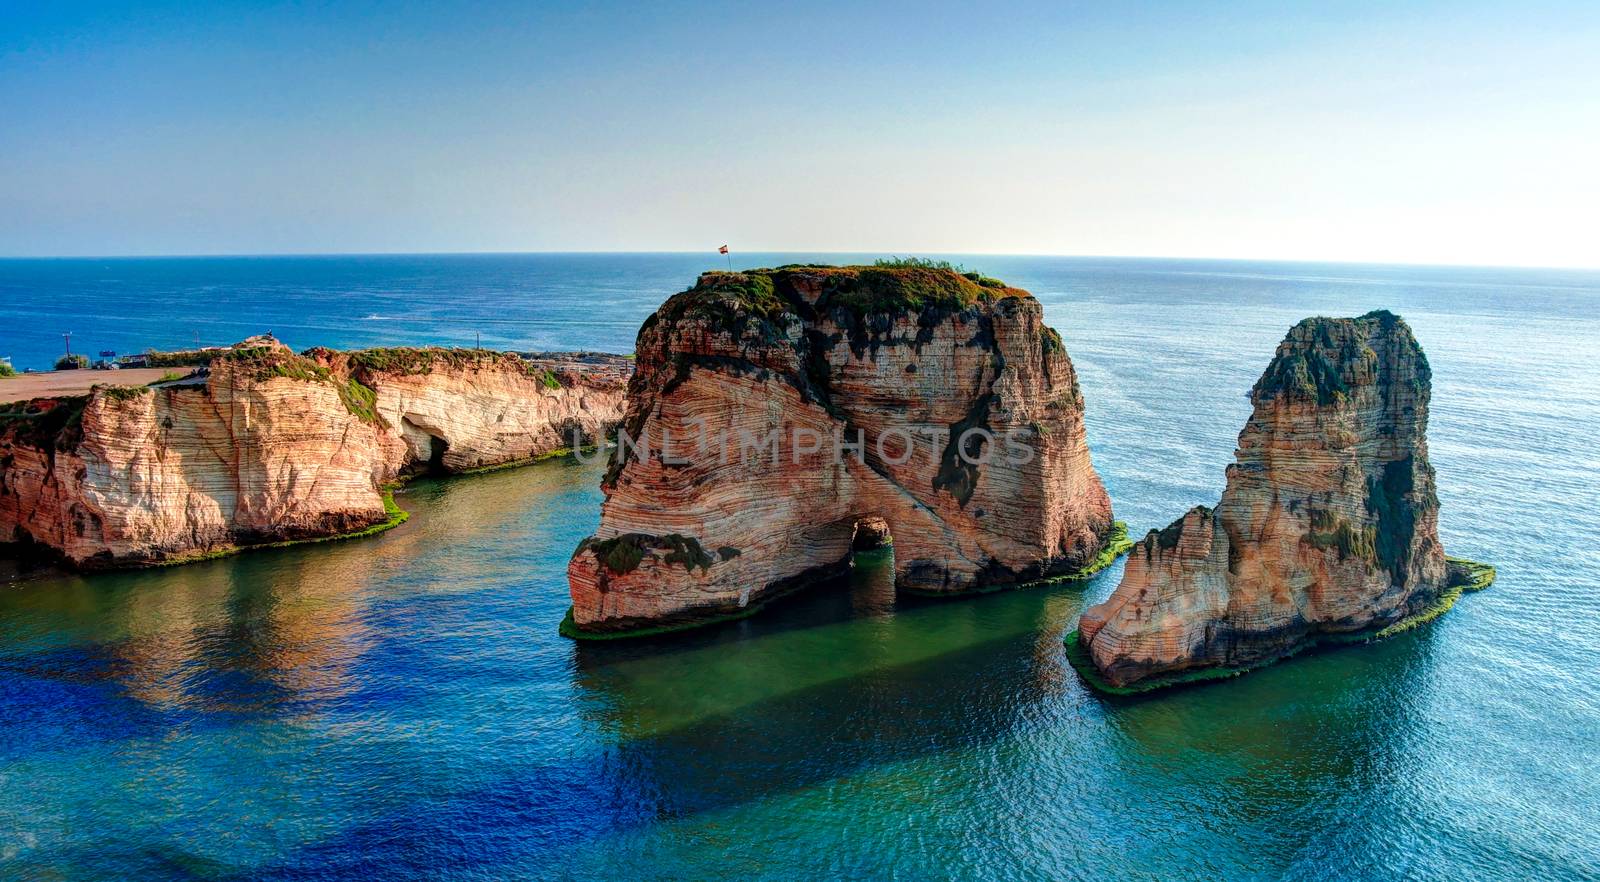 View Raouche or Pigeon Rock, Beirut Lebanon by homocosmicos